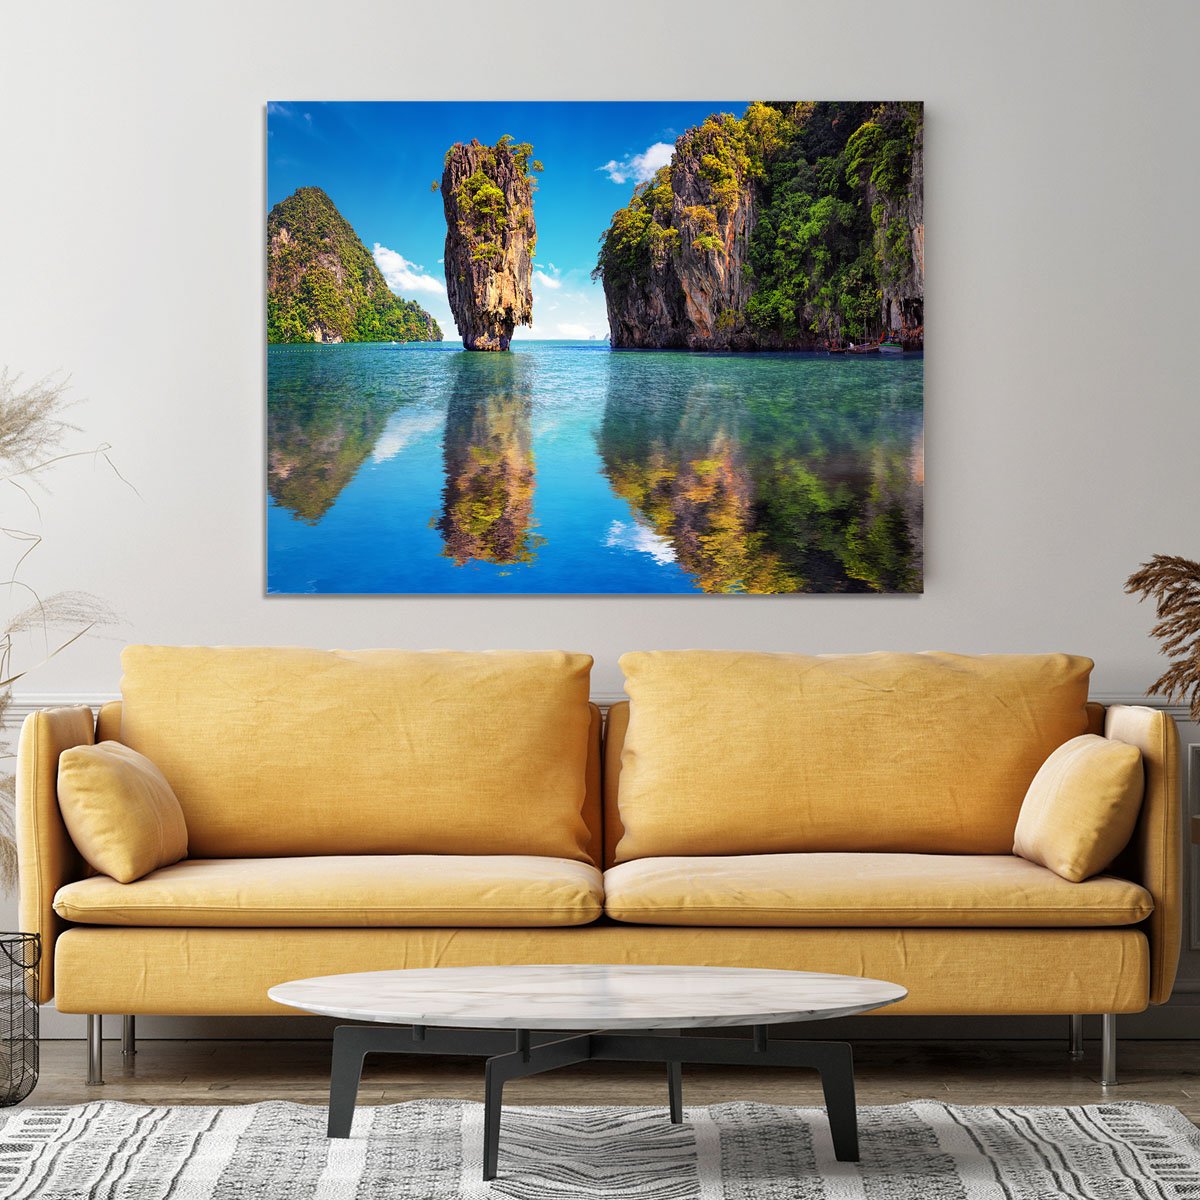 Beautiful nature of Thailand Canvas Print or Poster